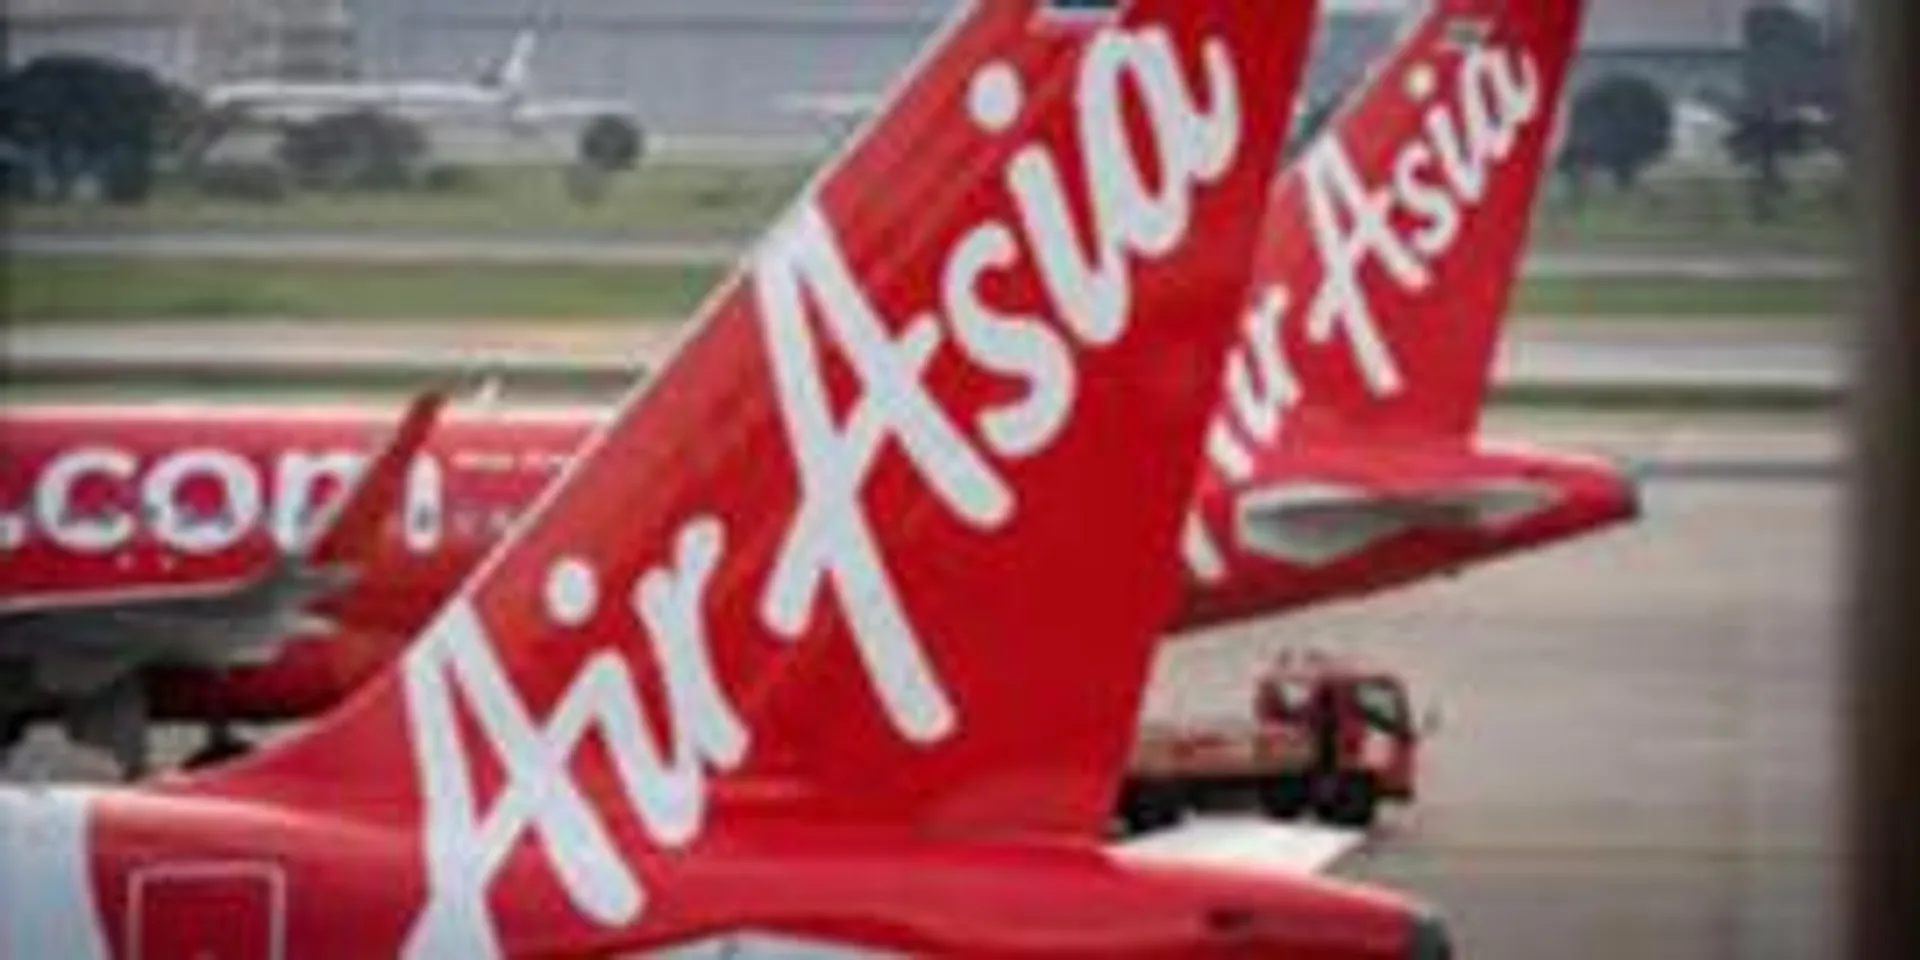 In view of the current worldwide travel scenario, passengers flying with AirAsia from Perth or any other city should check for any visa requirements, travel advisories, and health and safety recommendations. Additionally, you can find these specifics on the AirAsia website and pertinent government websites.The affordable tickets and ongoing discounts offered by AirAsia are well known. Flights are frequently affordable, especially when booked in advance or while taking advantage of sales.
https://airlines-office.com/airasia-airlines/airasia-perth-office-in-australia/